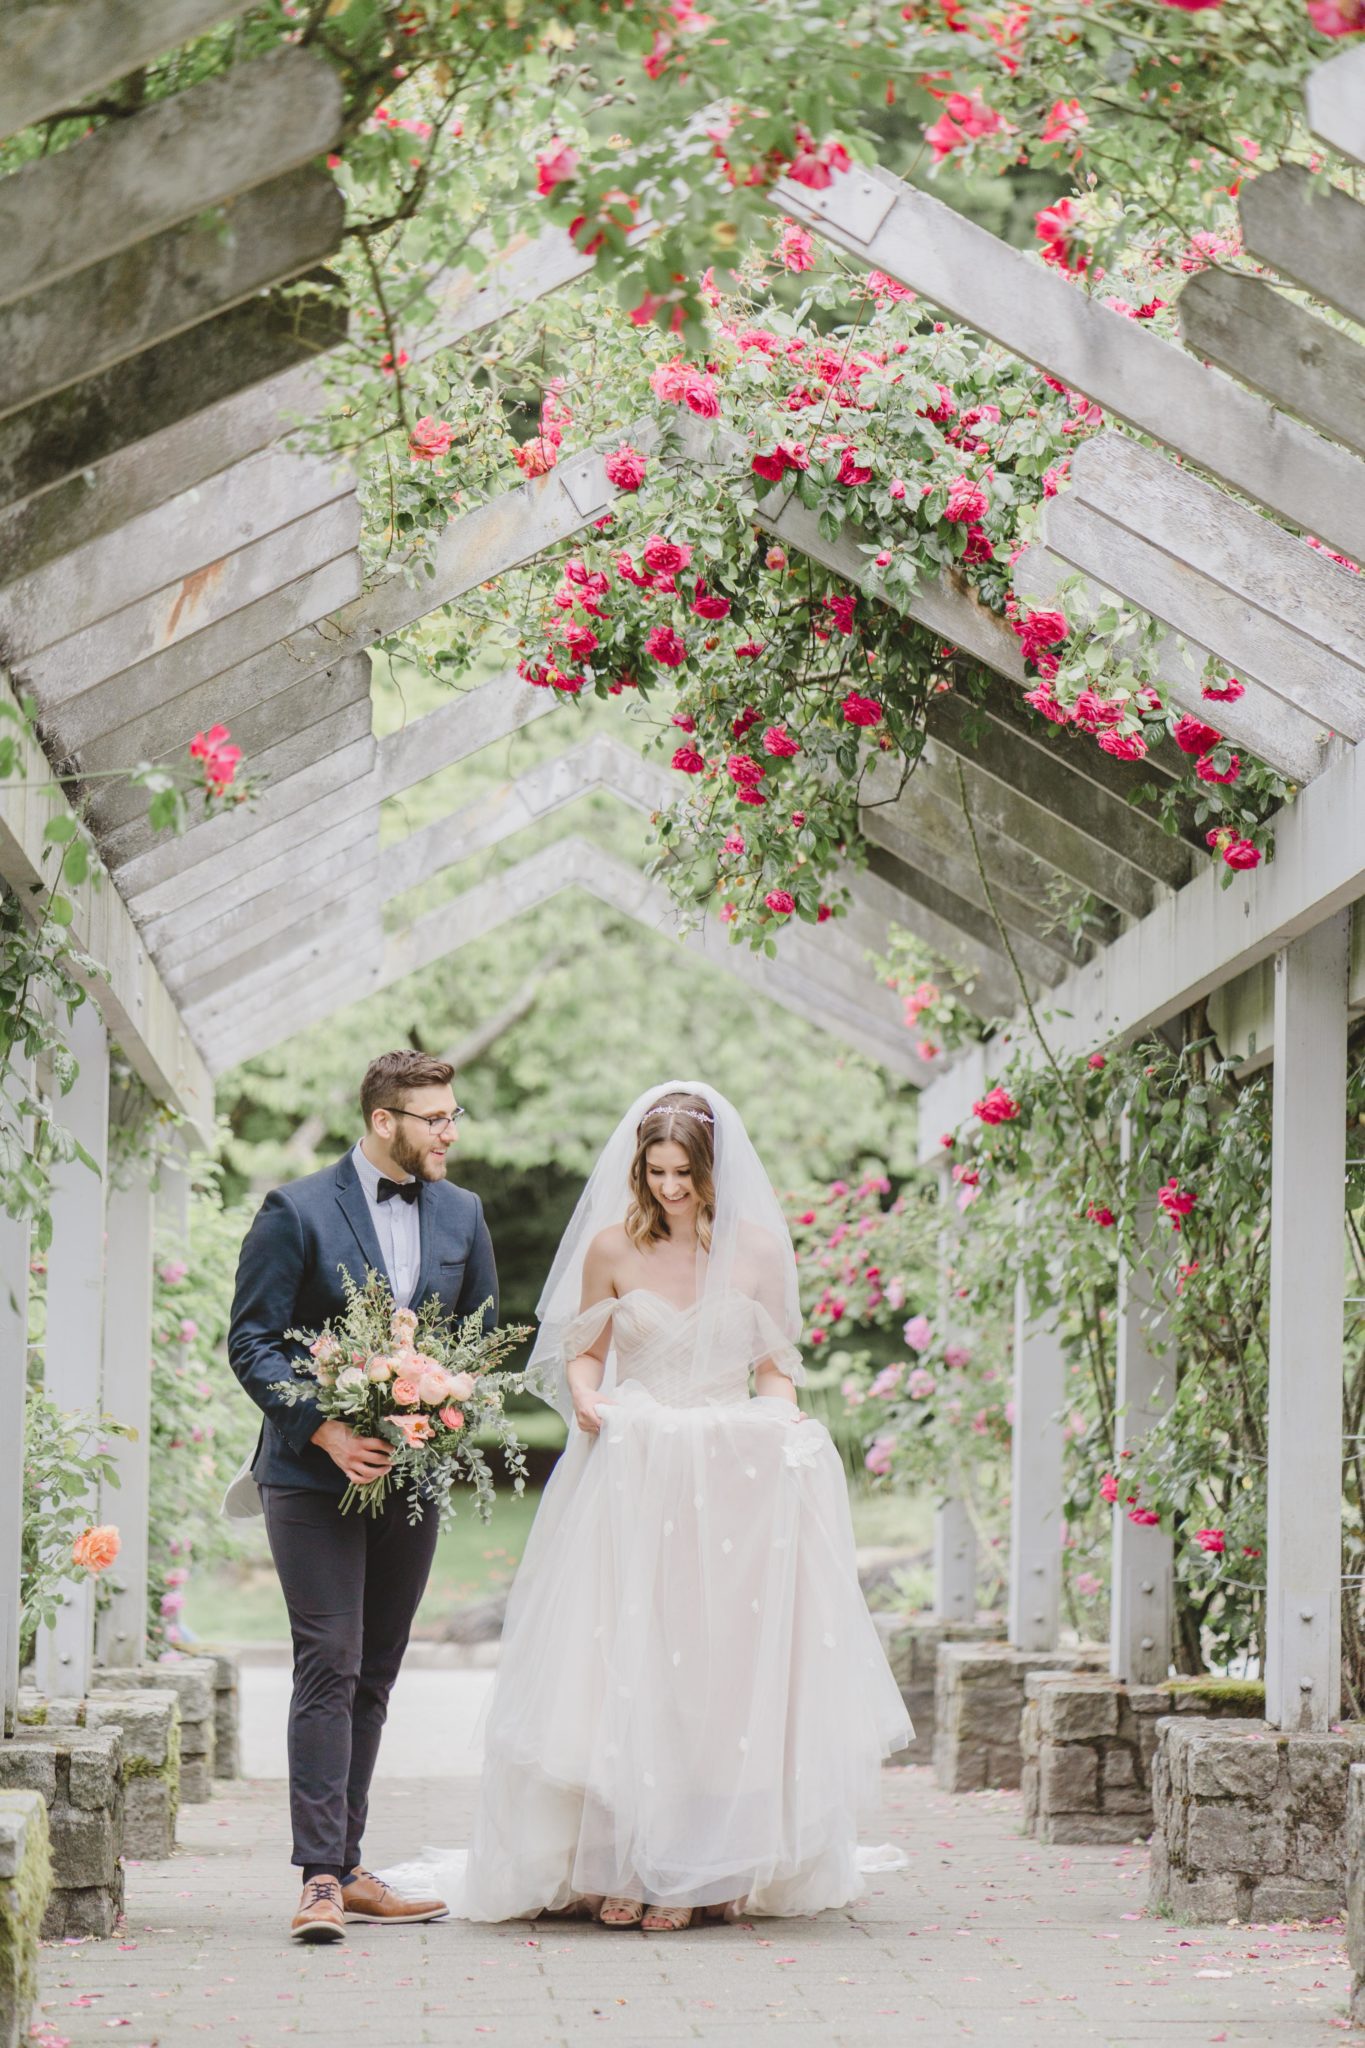 Enchanted Rose Garden Portraits in this Stanley Park Elopement Inspired by Taylor Swift Featured by Brontë Bride